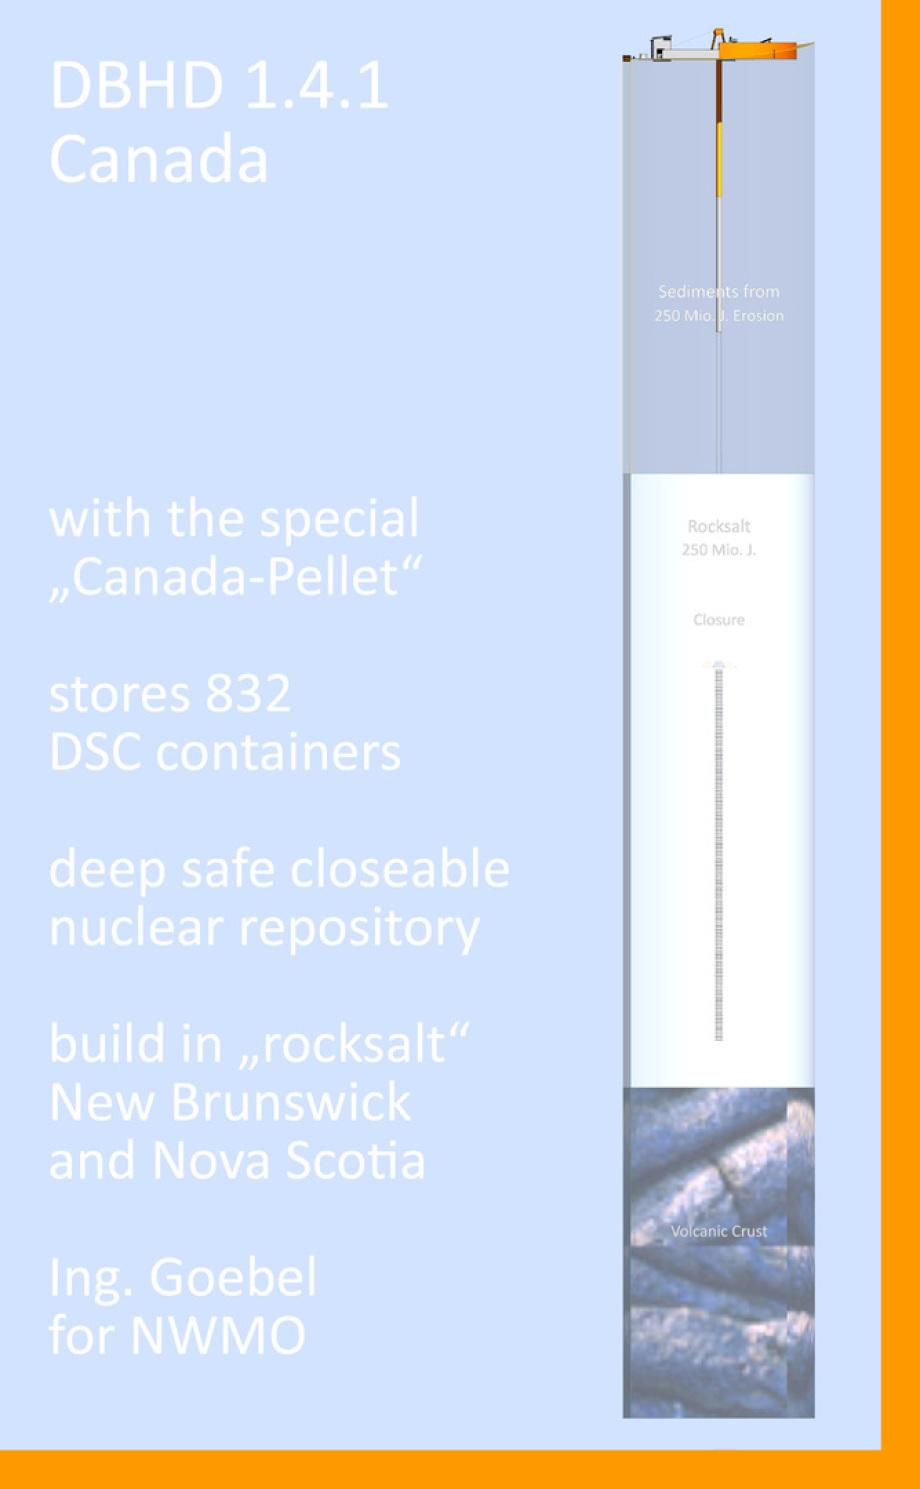 DBHD 1.4.1 Canada - with the special „Canada-Pellet“ stores 832 „old“ DSC containers in a deep, safe, closeable nuclear repository in rocksalt New Brunswick, Nova Scotia